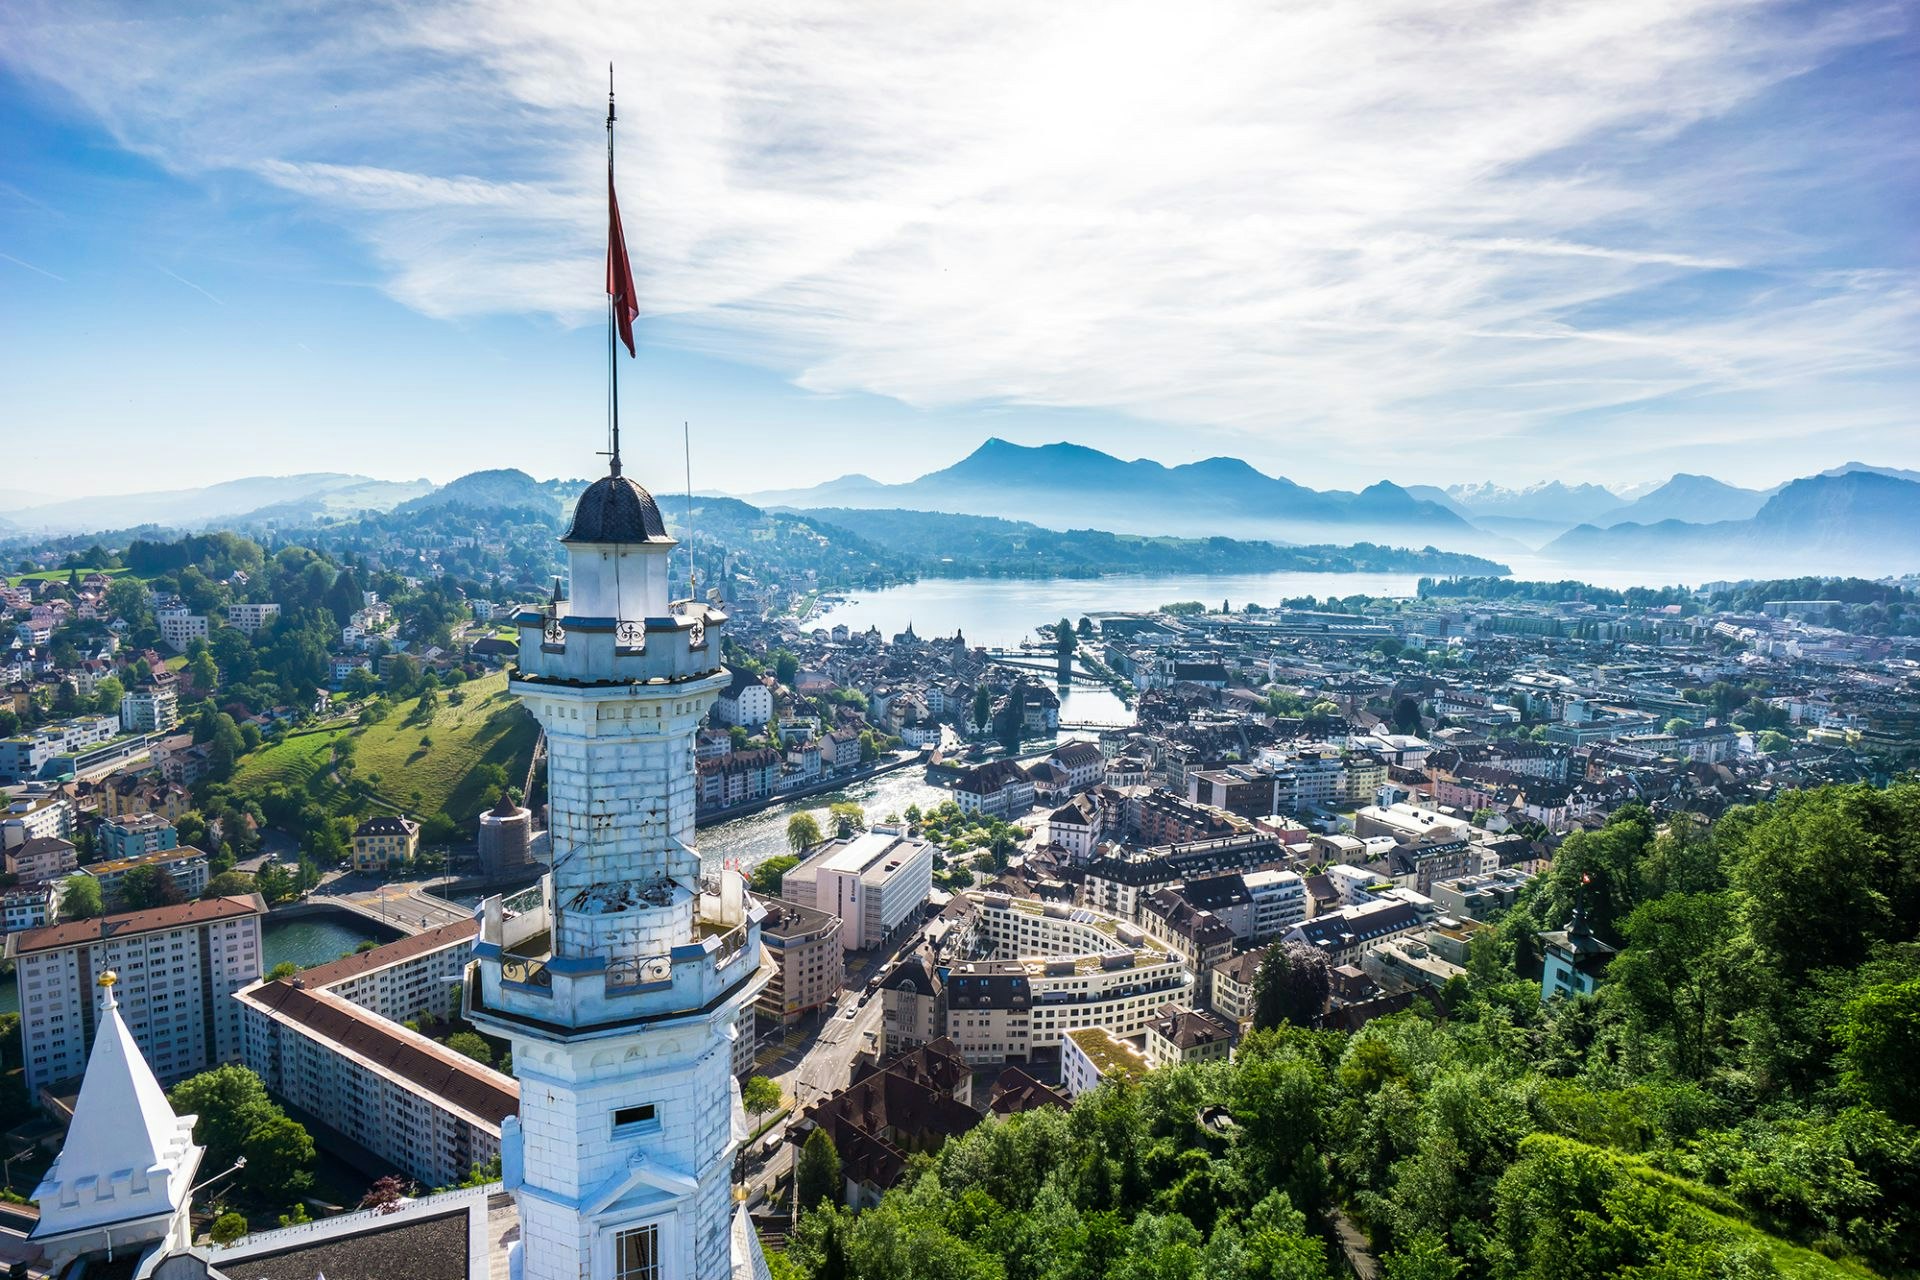 Spend the night above the rooftops of Lucerne at Château Gütsch